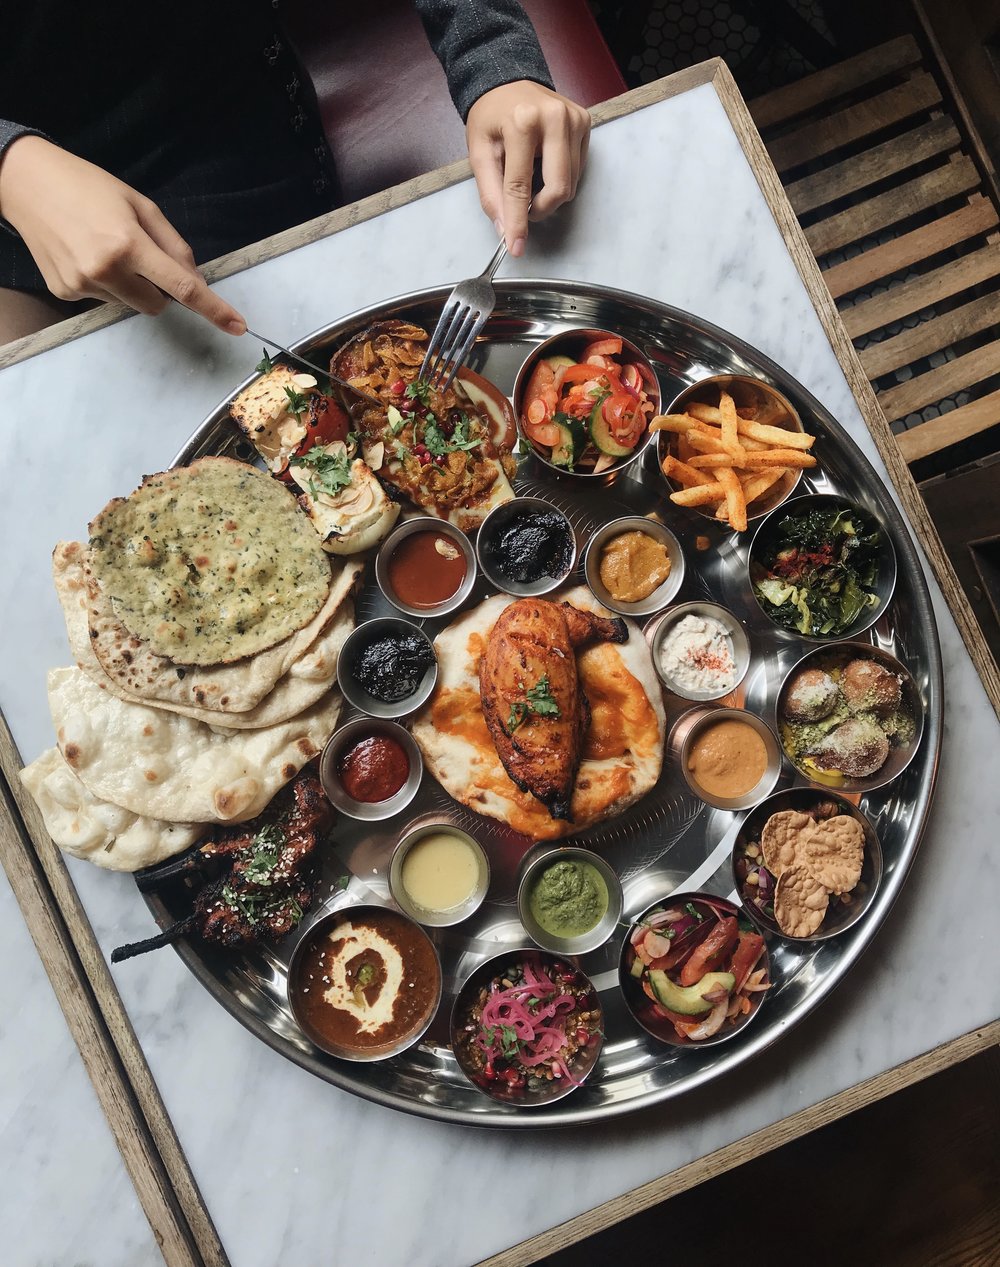 Tawa Roti brings West Indian cuisine to London Clapham - Feed the Lion